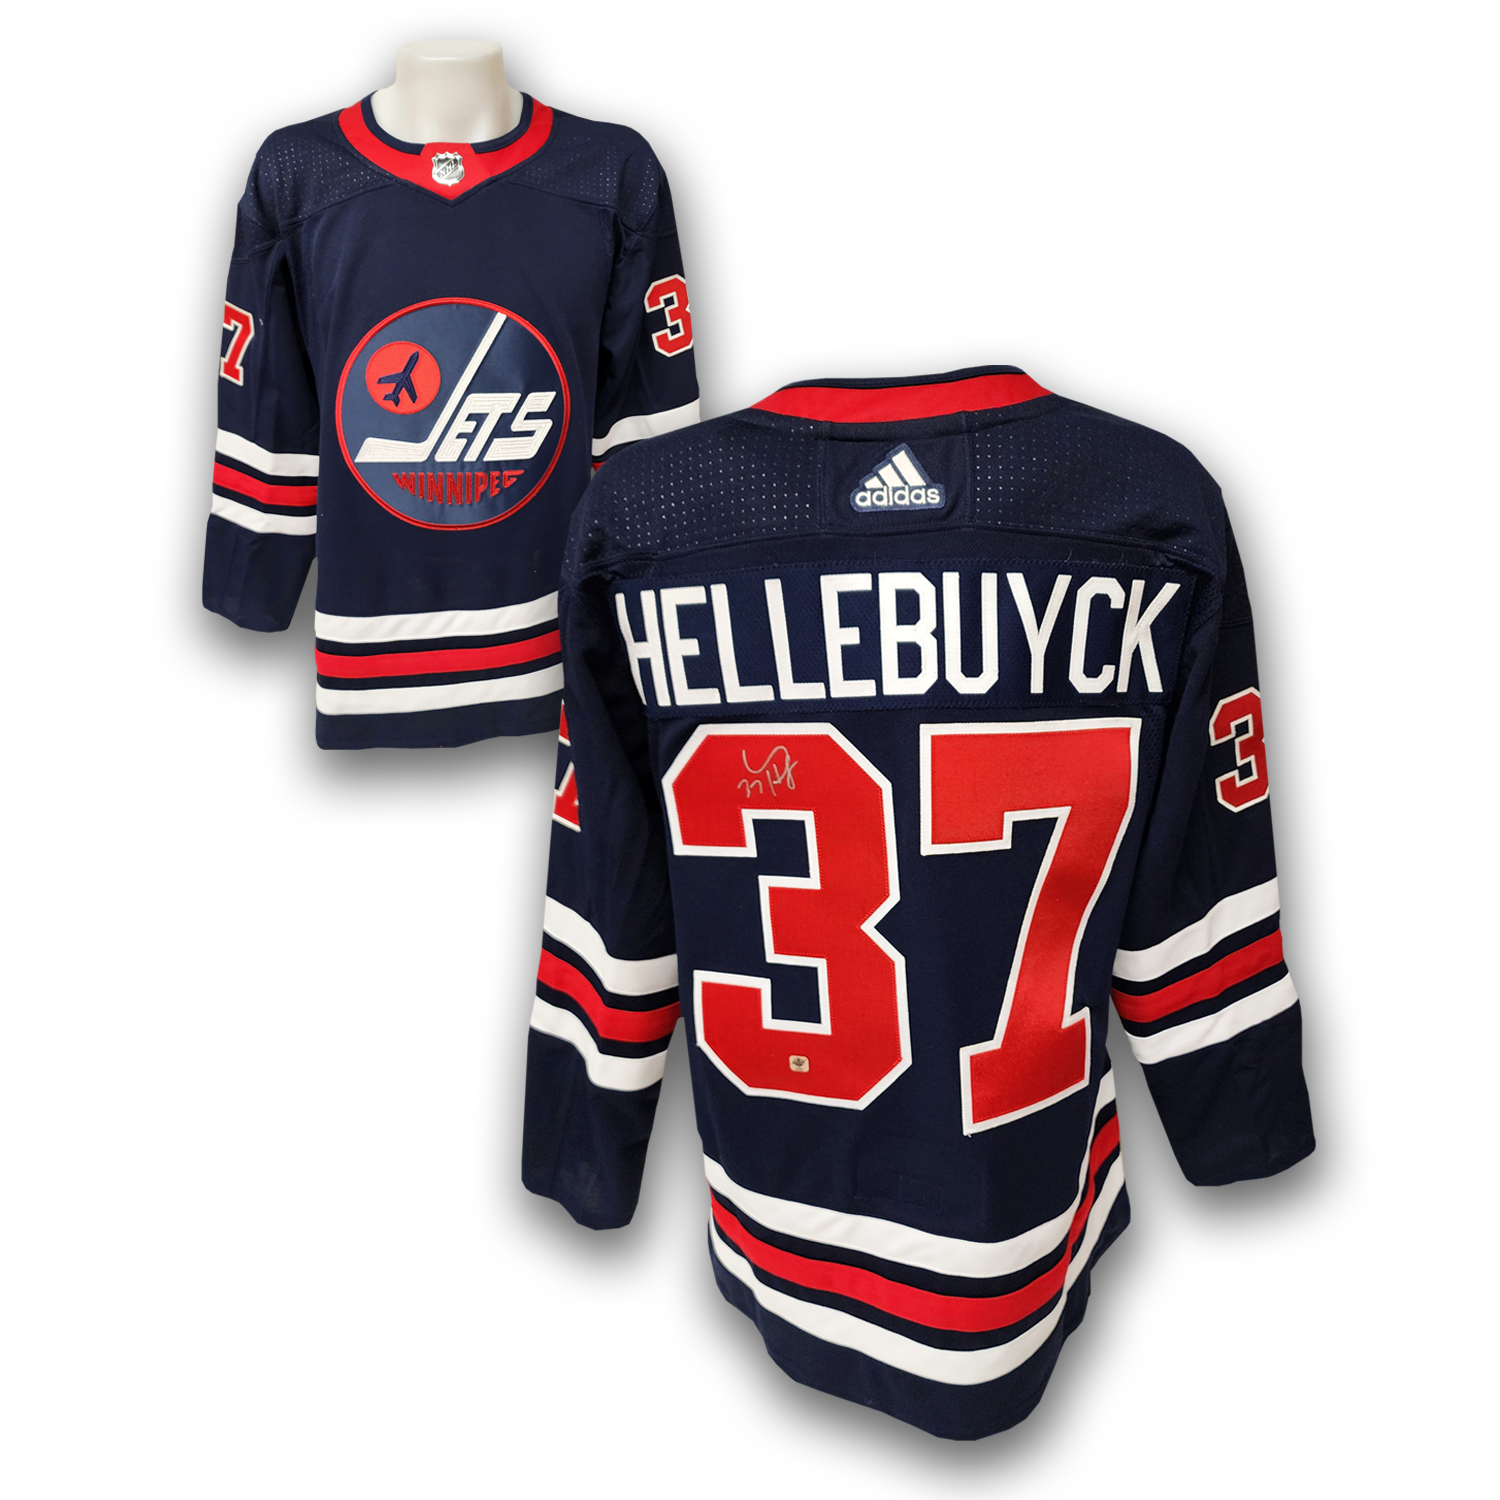 CONNOR HELLEBUYCK Winnipeg Jets SIGNED Autographed JERSEY w/JSA COA XL NEW  - Autographed NHL Jerseys at 's Sports Collectibles Store